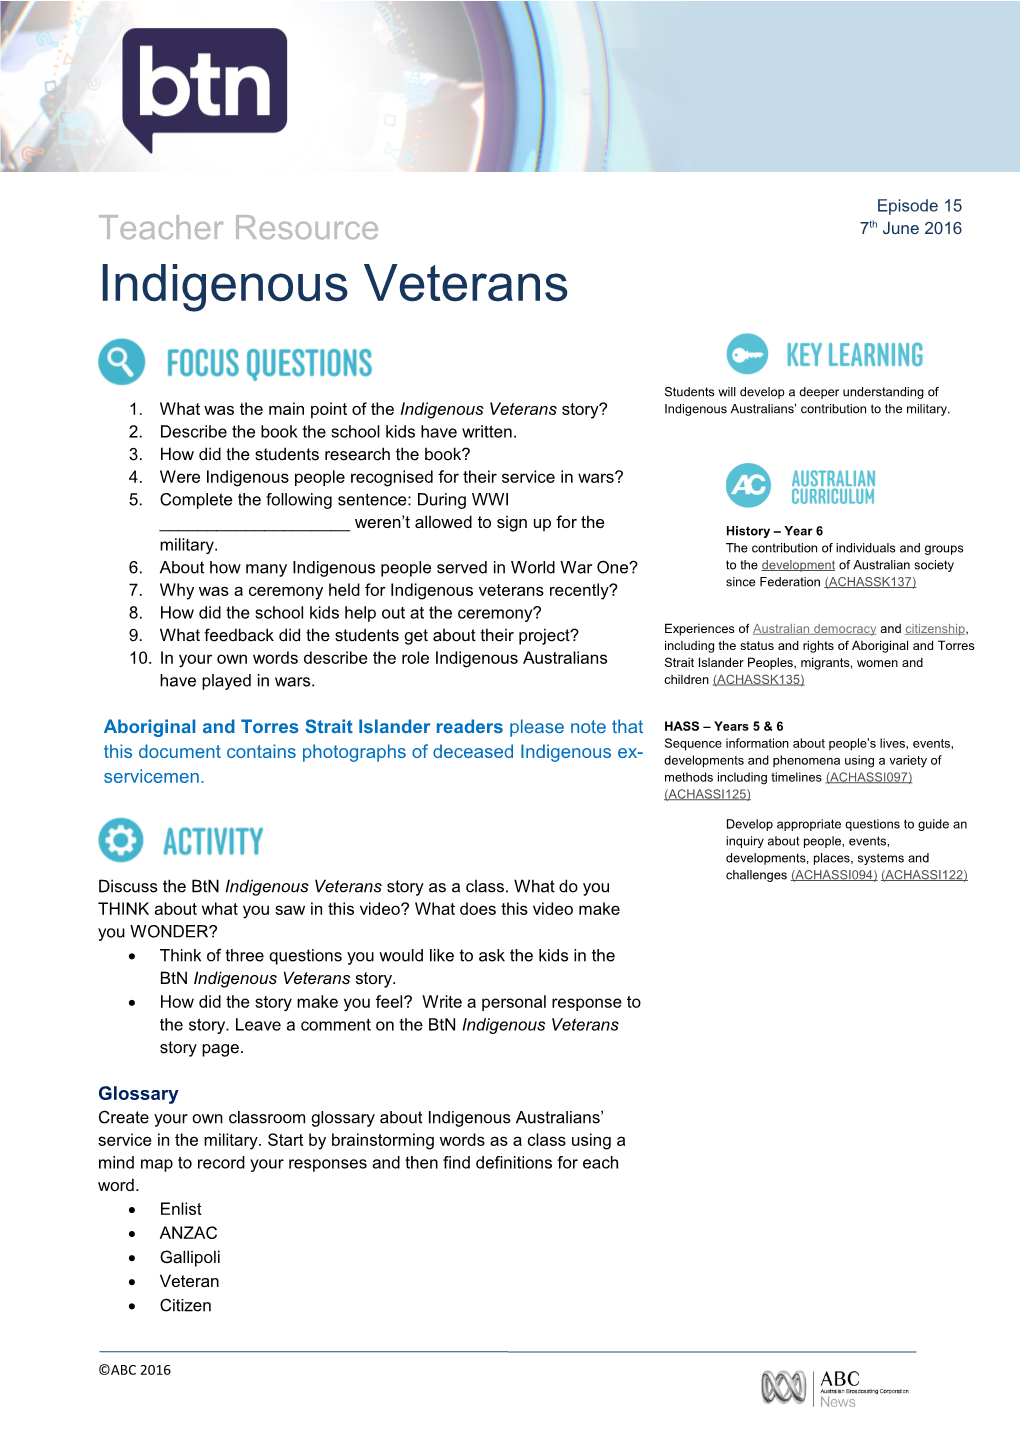 1. What Was the Main Point of the Indigenous Veterans Story?